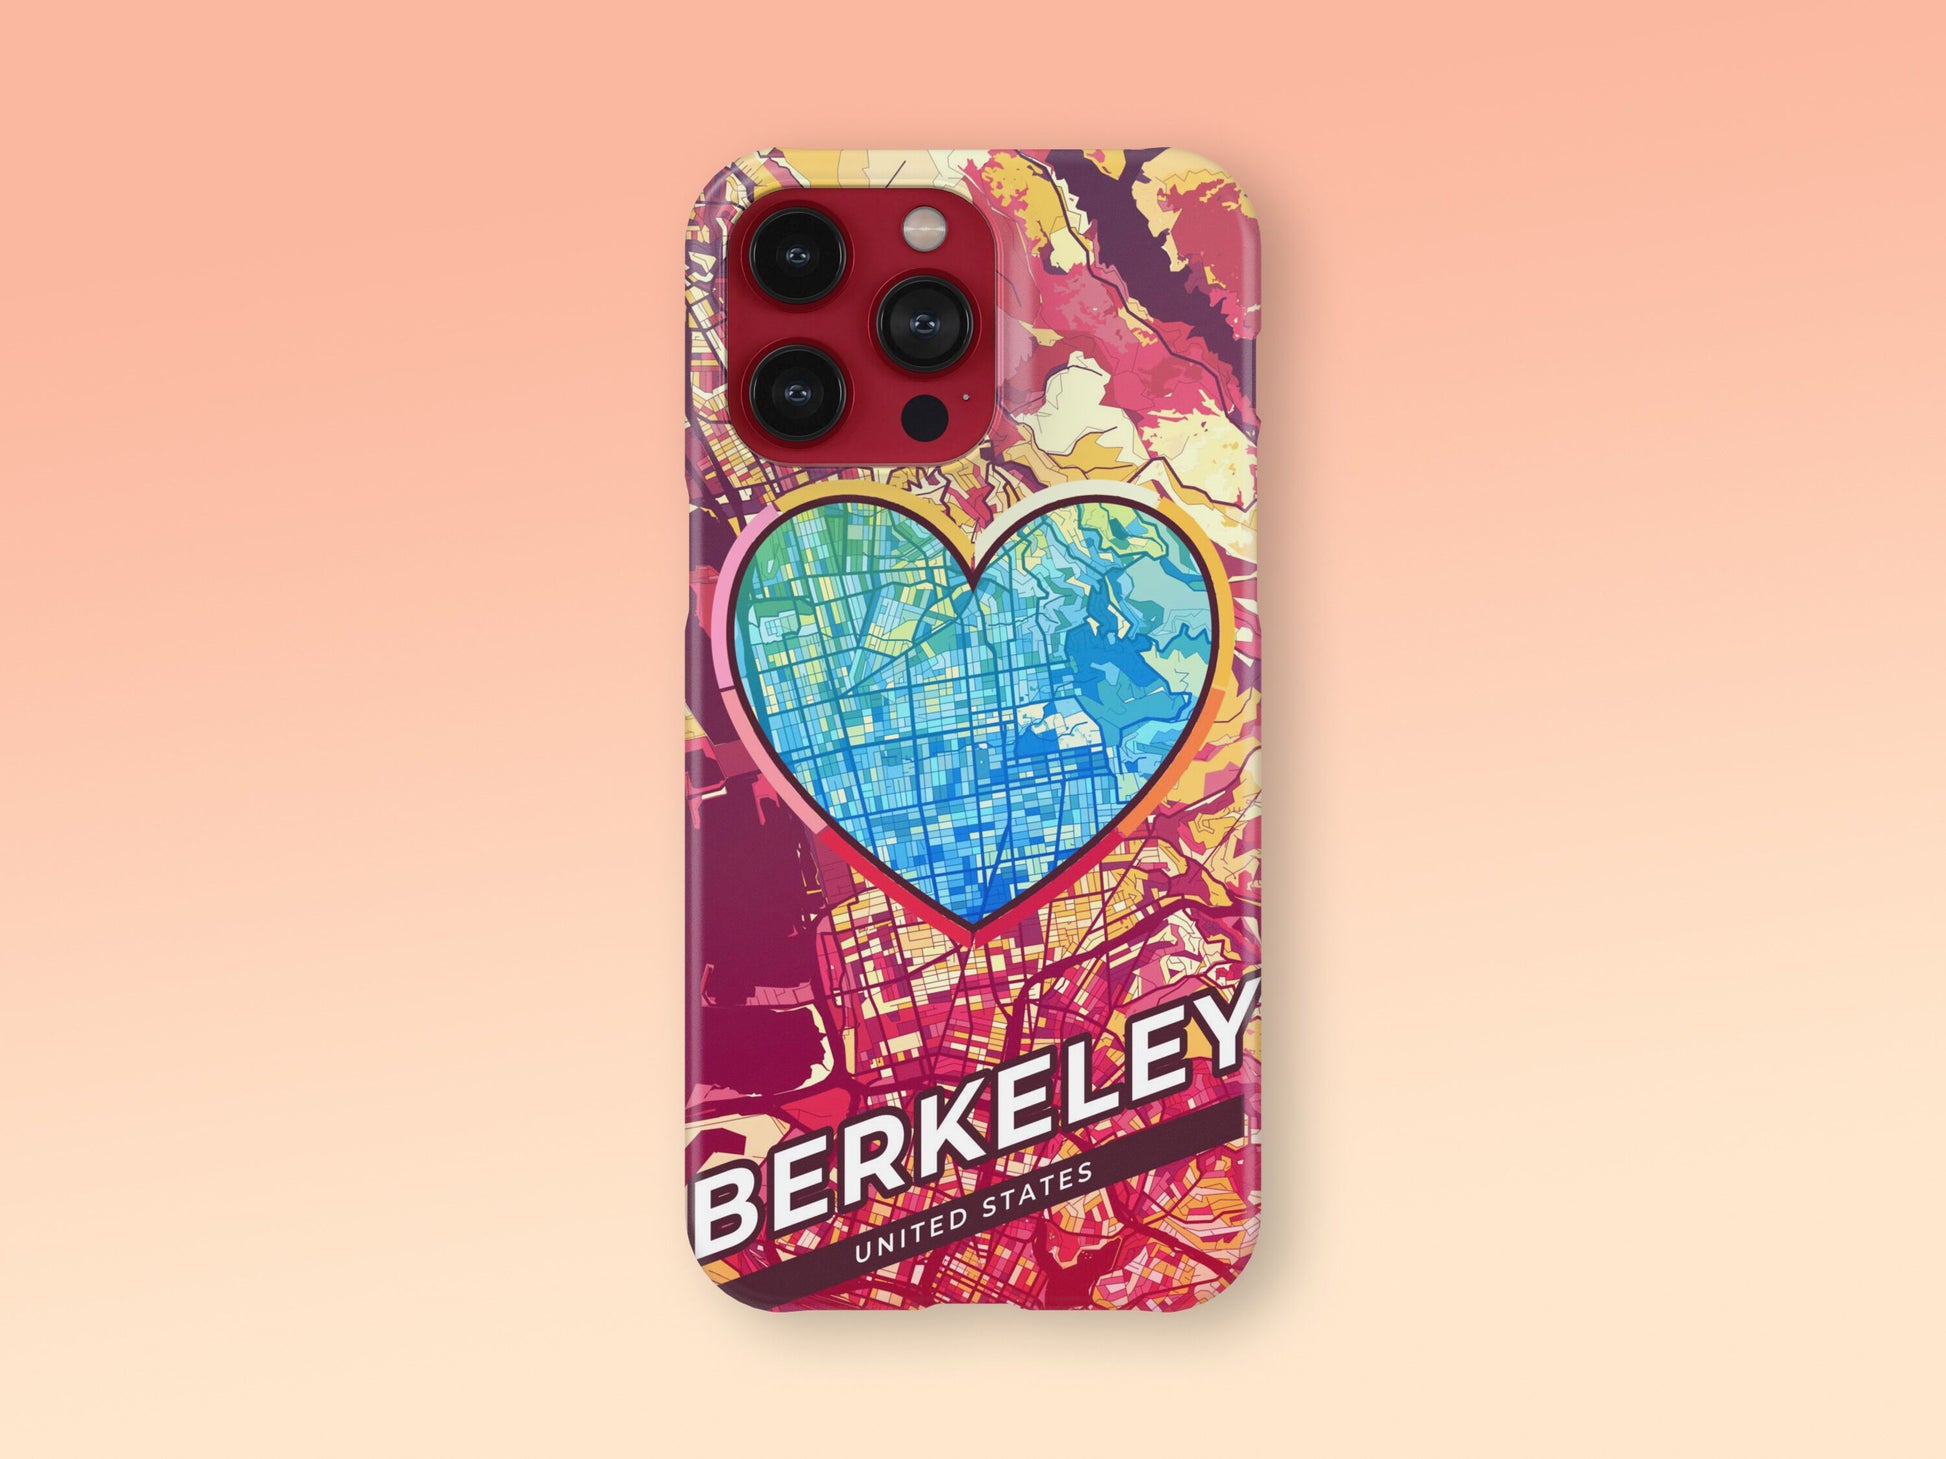 Berkeley California slim phone case with colorful icon. Birthday, wedding or housewarming gift. Couple match cases. 2